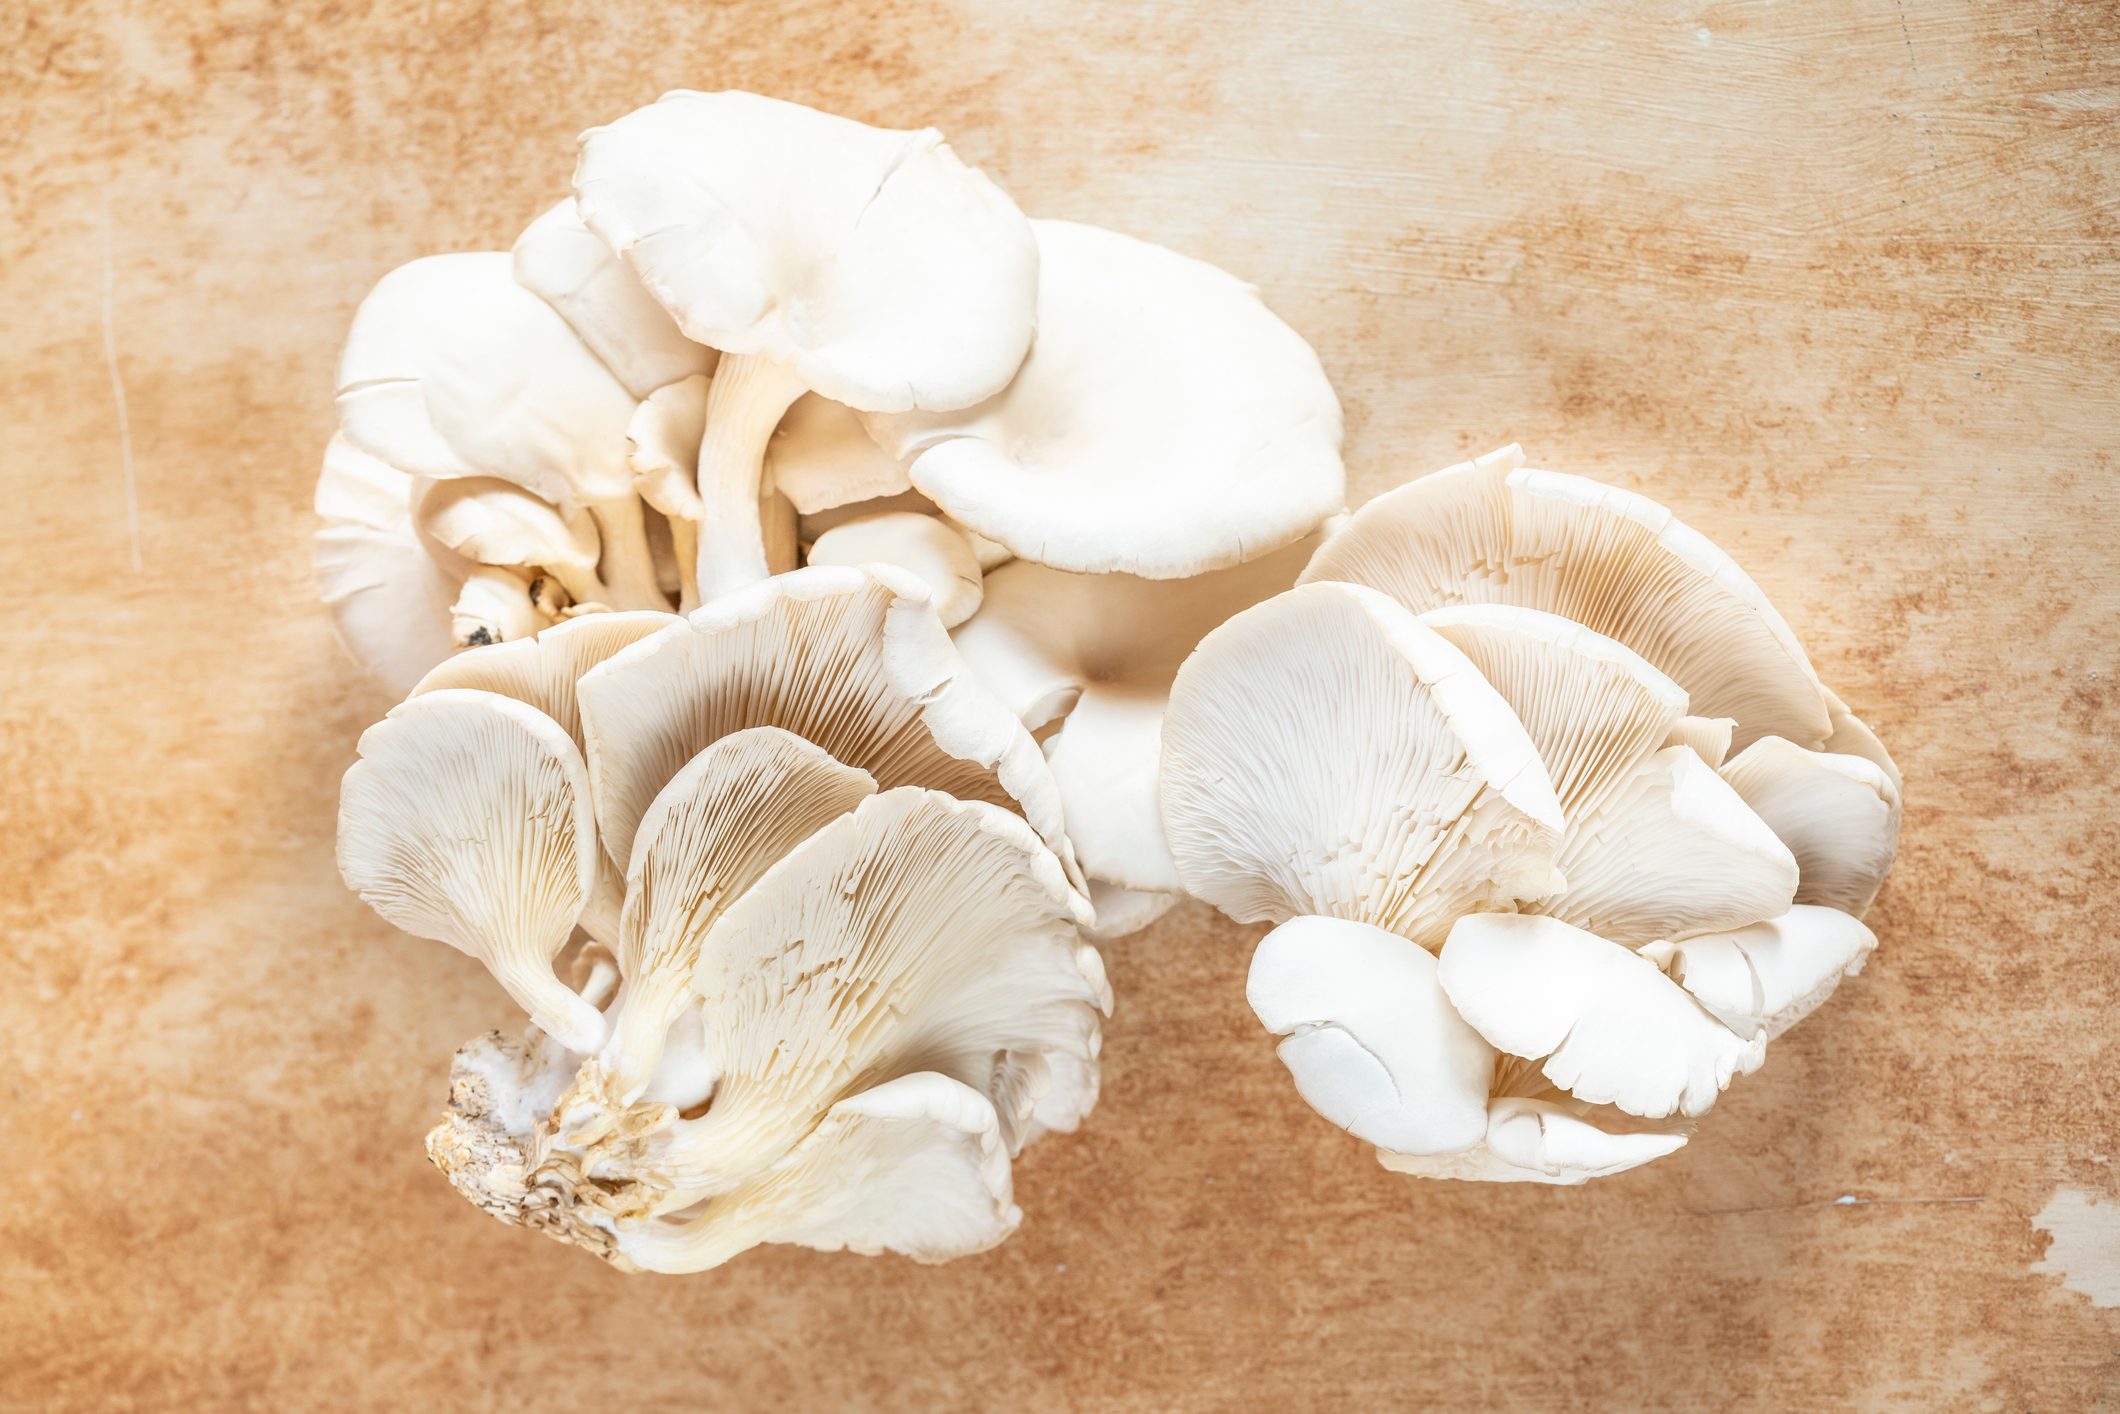 raw and fresh Oyster mushroom on table with copy space